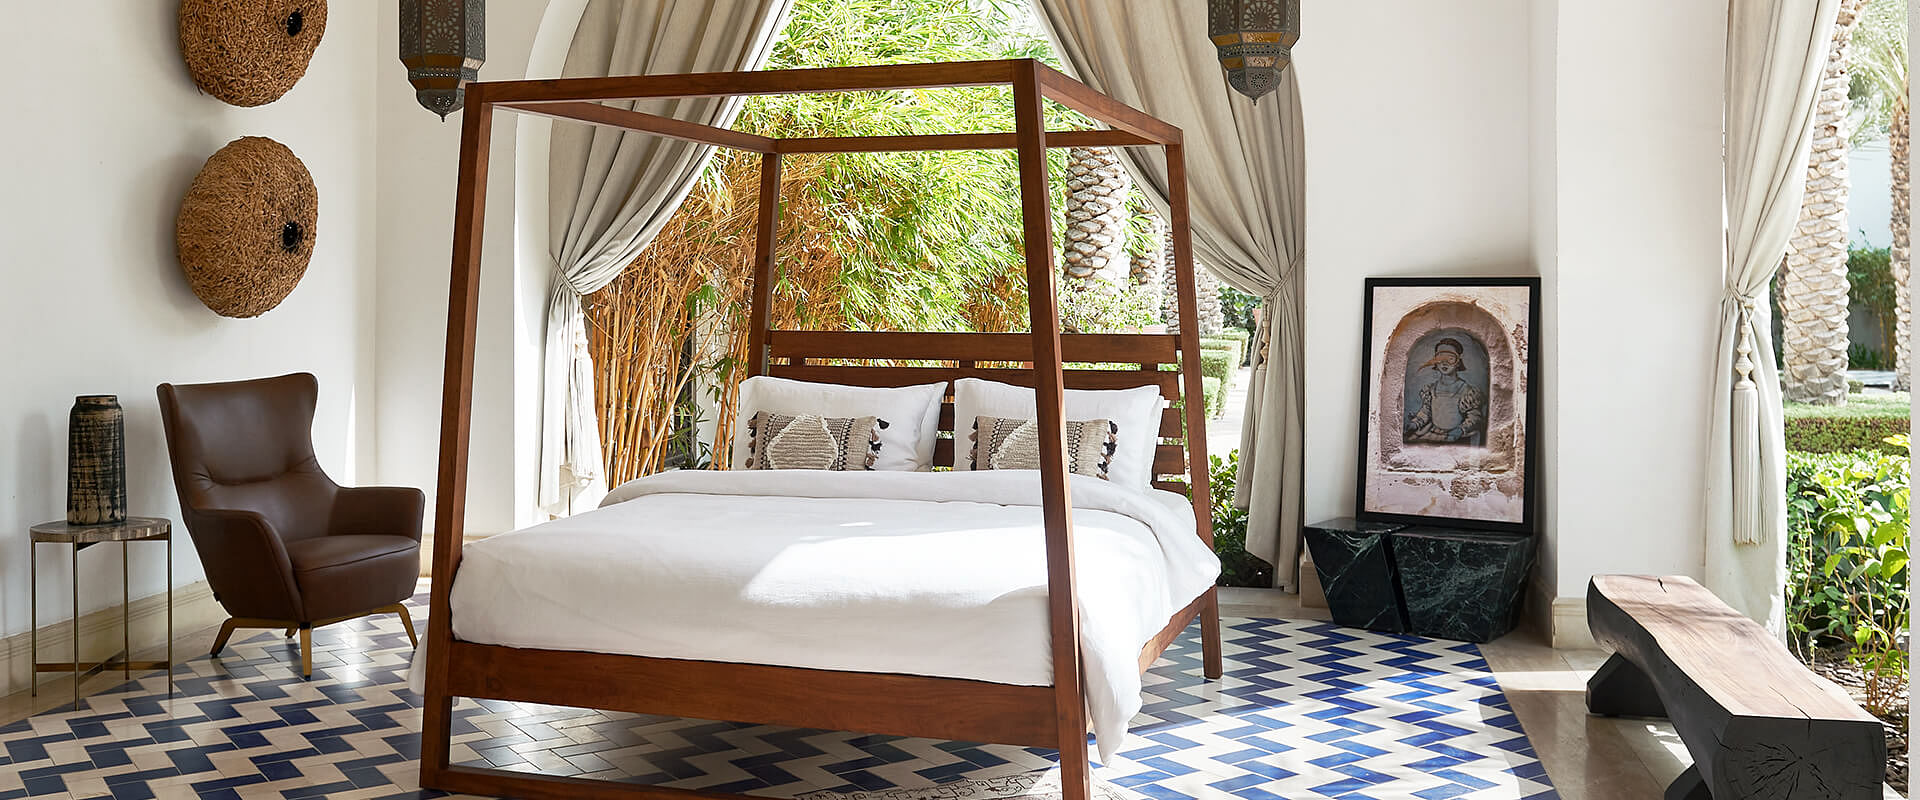 A four poster bed stands by the windows on a blue-and-white tiled floor. A leather armchair,  wooden bench, and wall art are positioned nearby.